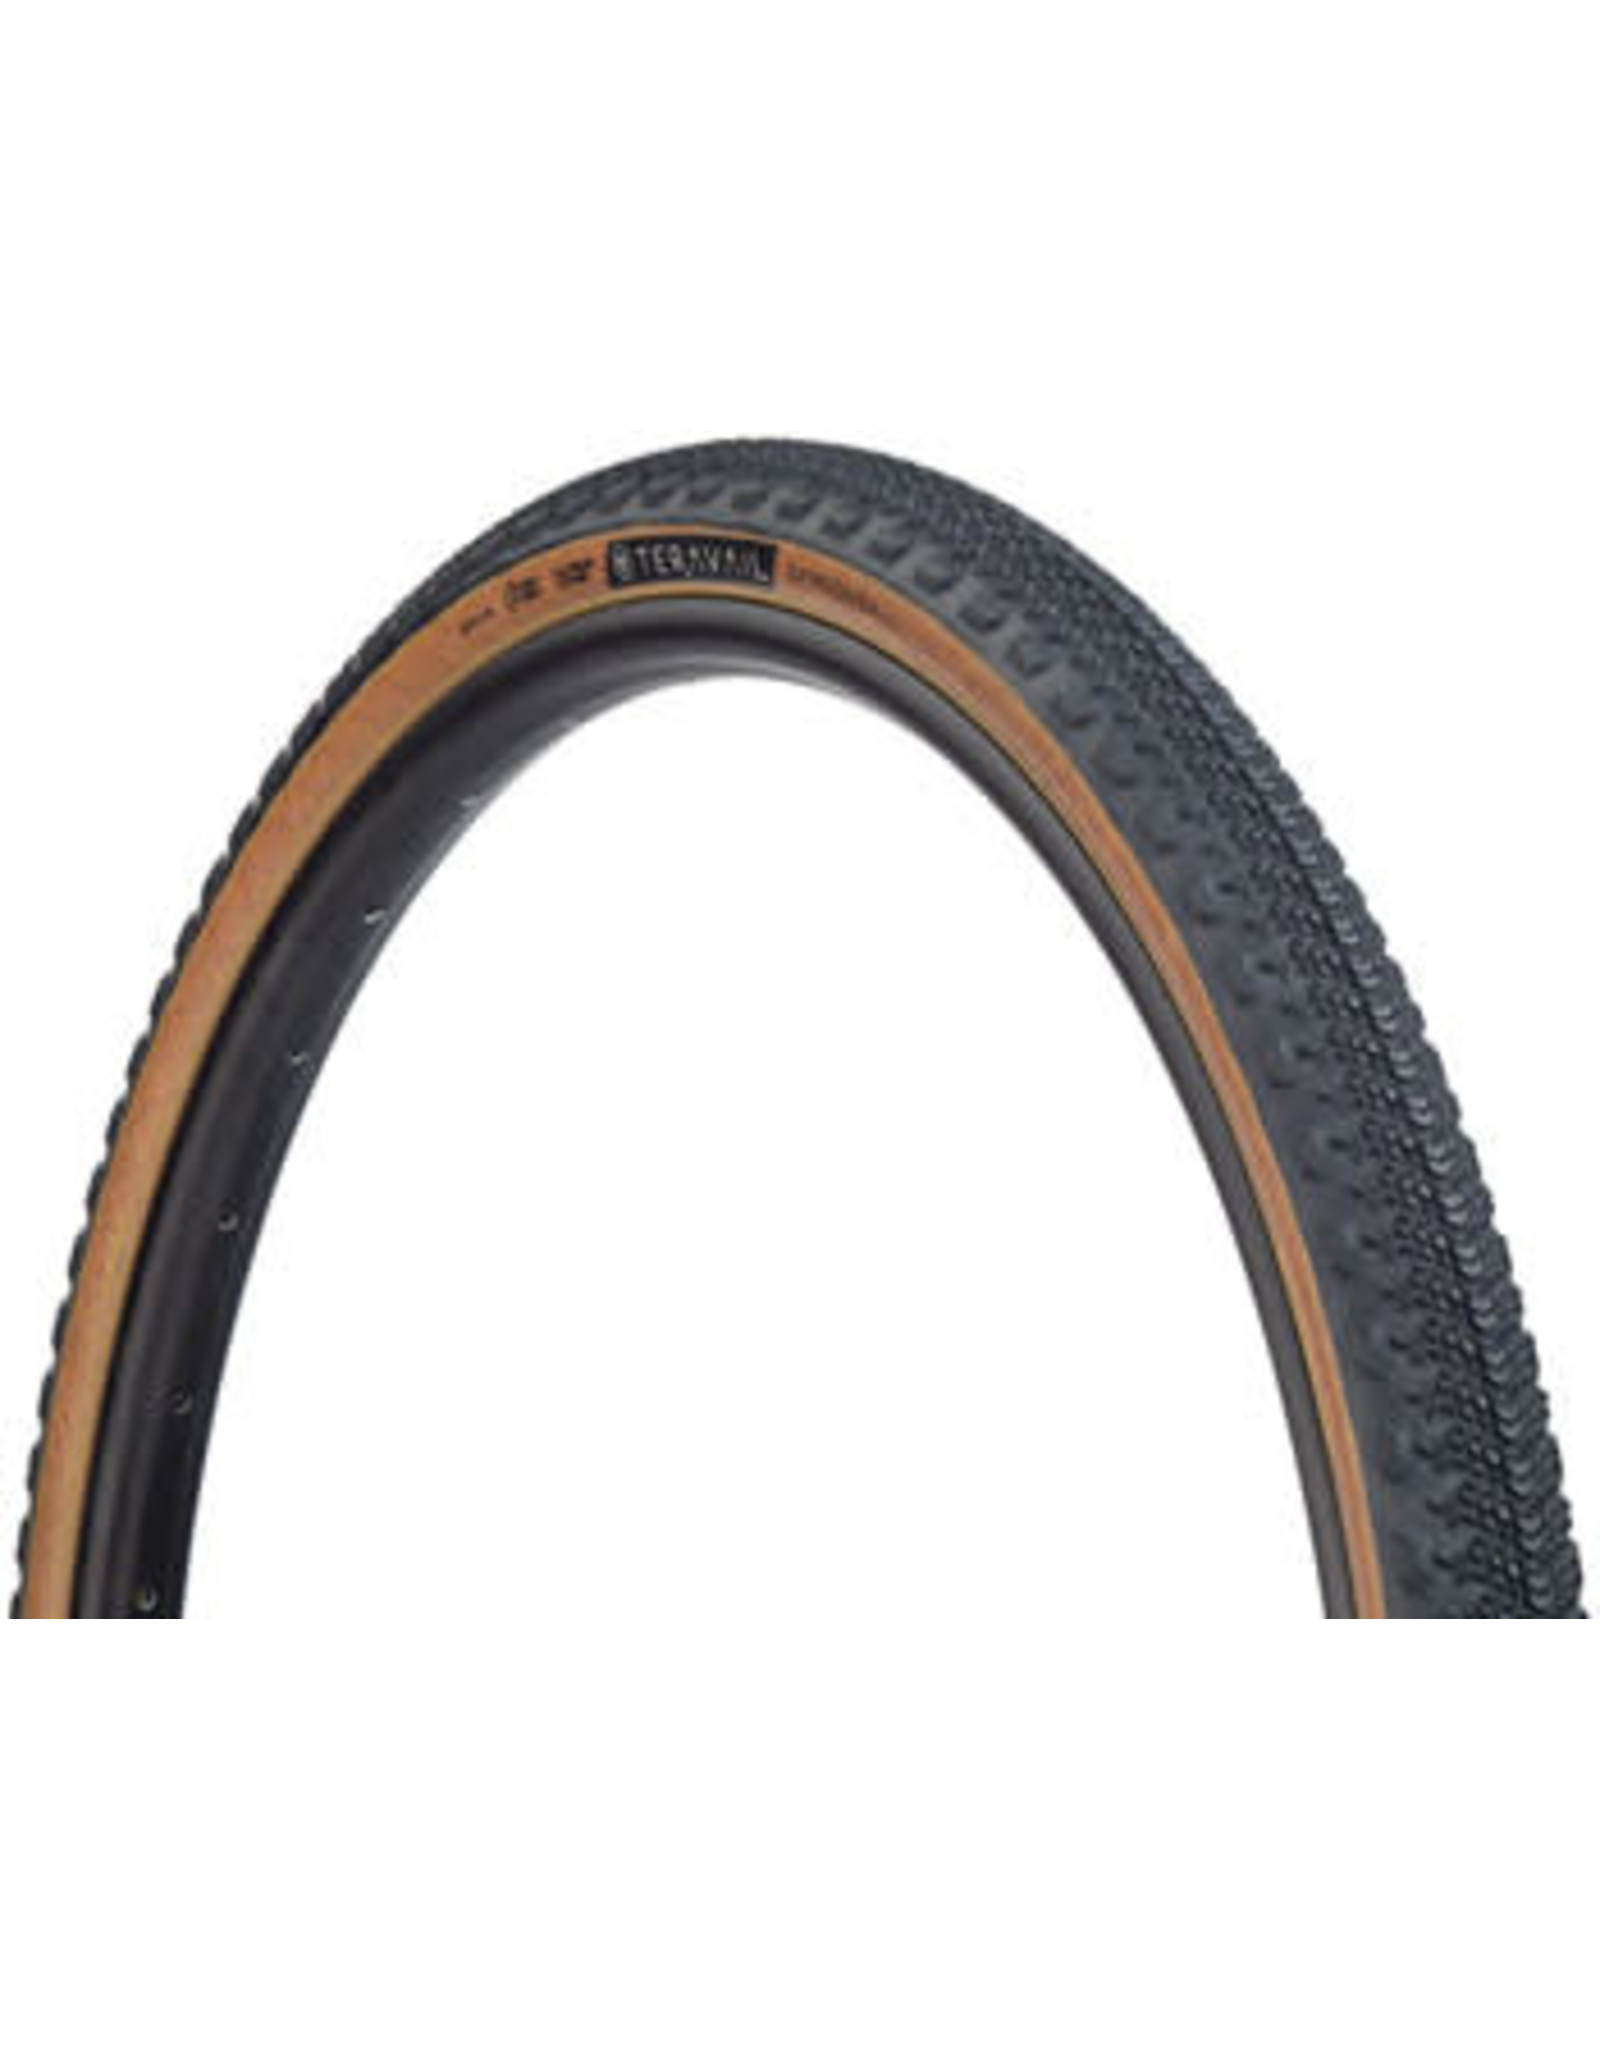 Teravail Teravail Cannonball Tire 650 x 40 Tubeless Folding Tan Durable Fast Compound